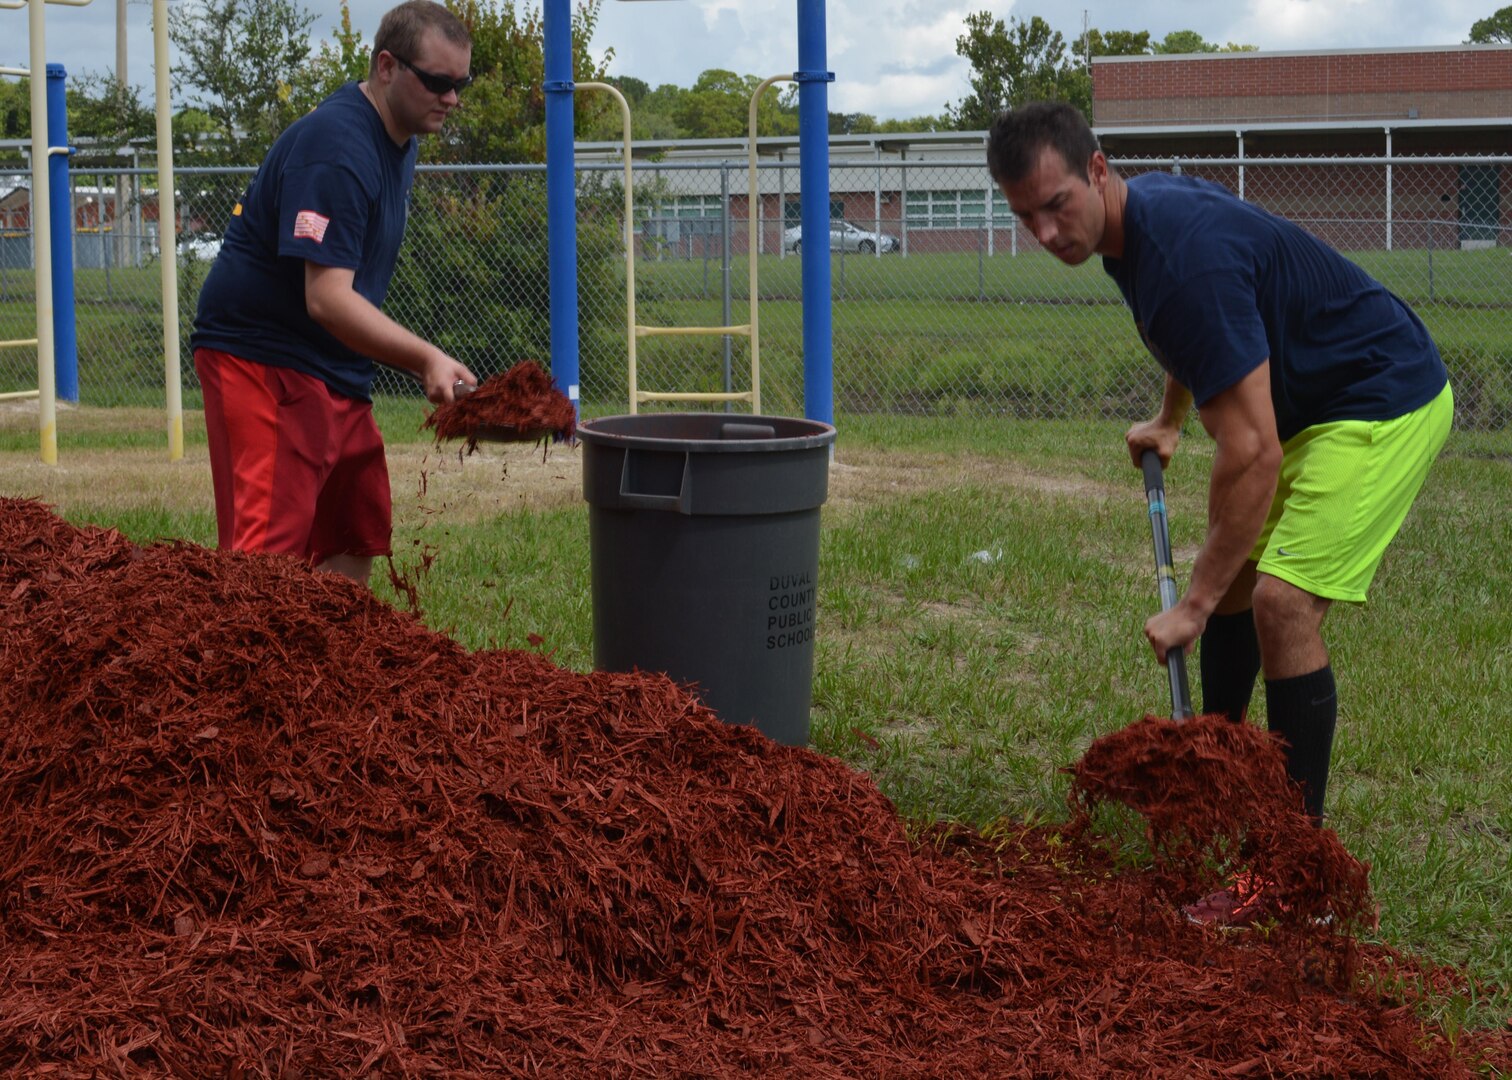 Machinist's Mate 1st Class Brian Hill (R) and Engineman 1st Class Robin Mosely (L) shovel mulch into a makeshift wheel-barrow at Oak Hill Academy in Jacksonville, Fla. Hill and Mosely are Sailors with Southeast Regional Maintenance Center (SERMC) in Mayport, Fla. Both volunteered to help clean, assemble furniture and prepare classrooms for the 2016-2017 school year. SERMC provides surface ship maintenance, modernization and technical expertise in support of the ships of the US Navy. Photo by Scott Curtis